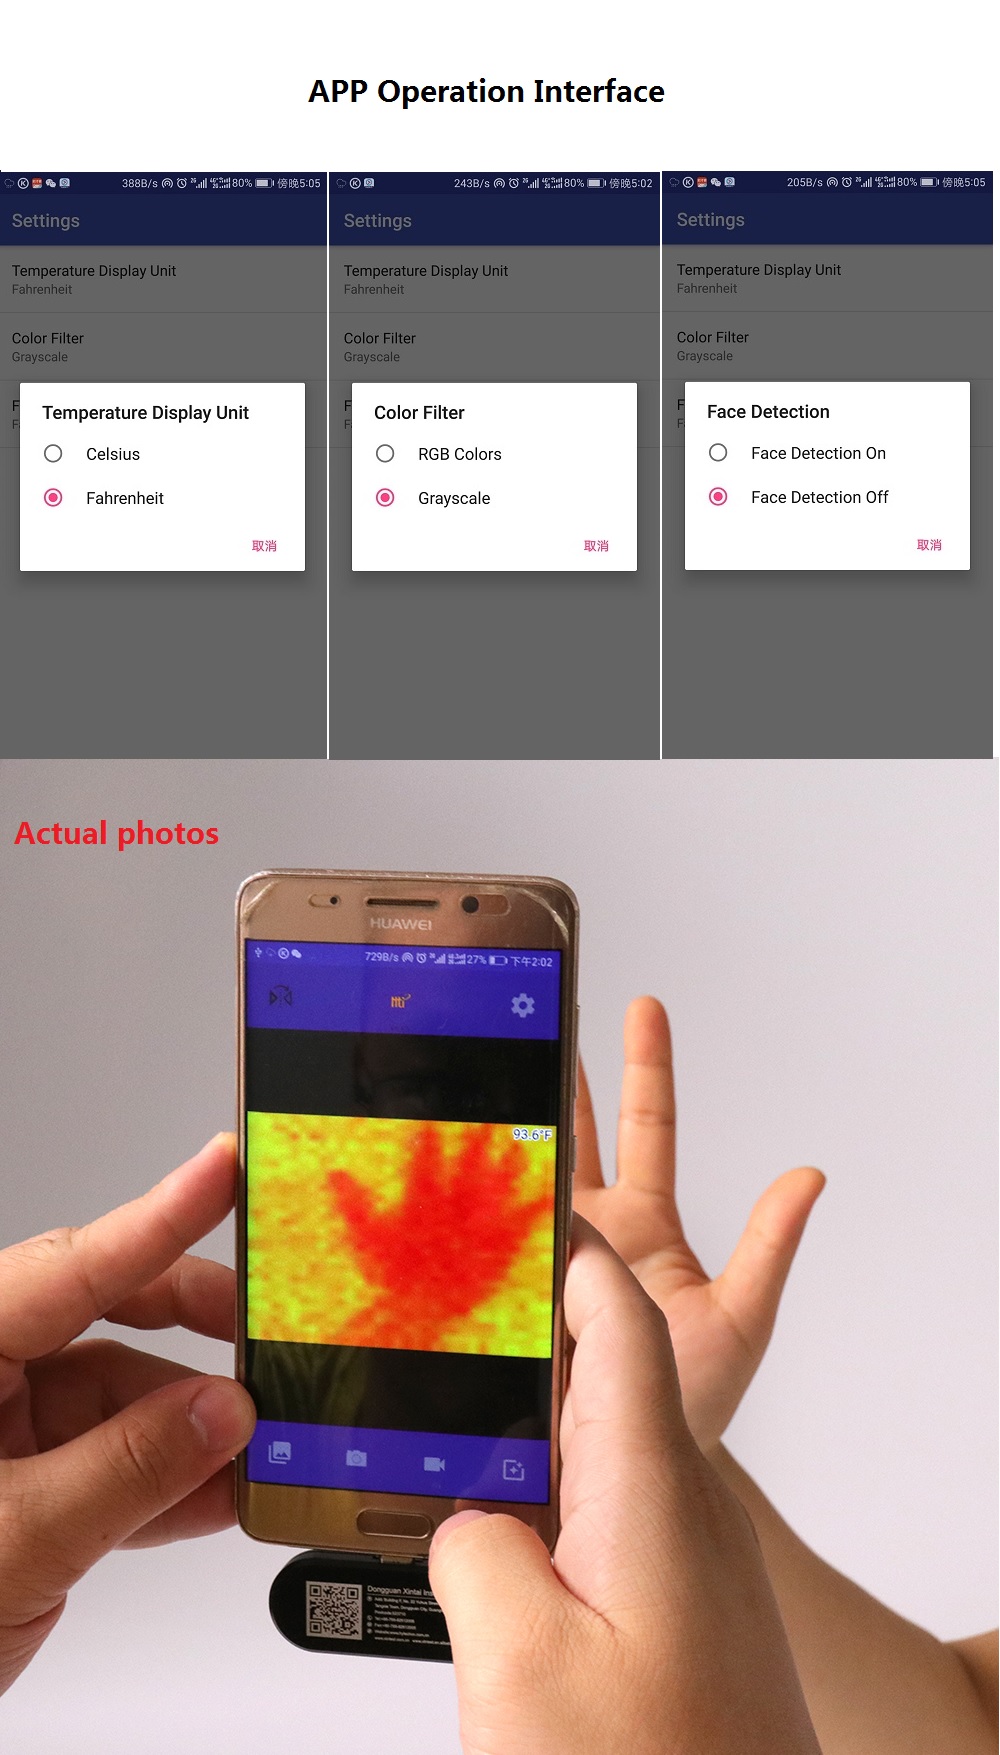 Mobile Phone Thermal Infrared Imager Support Video and Pictures Recording 20 ℃ ~300 ℃ Temperature Test ℃/℉ Face Detection Imaging Camera For Android 80